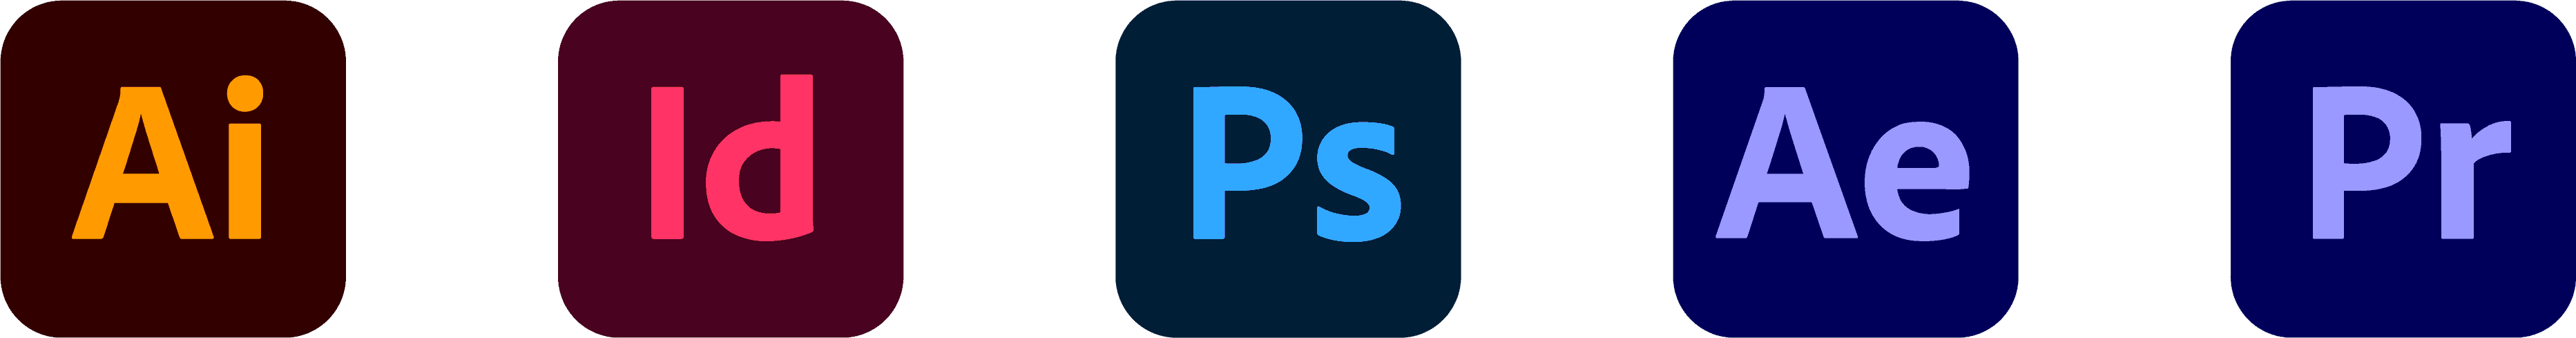 Adobe Applications - Photoshop, Illustrator, InDesign, After Effects, Premiere Pro